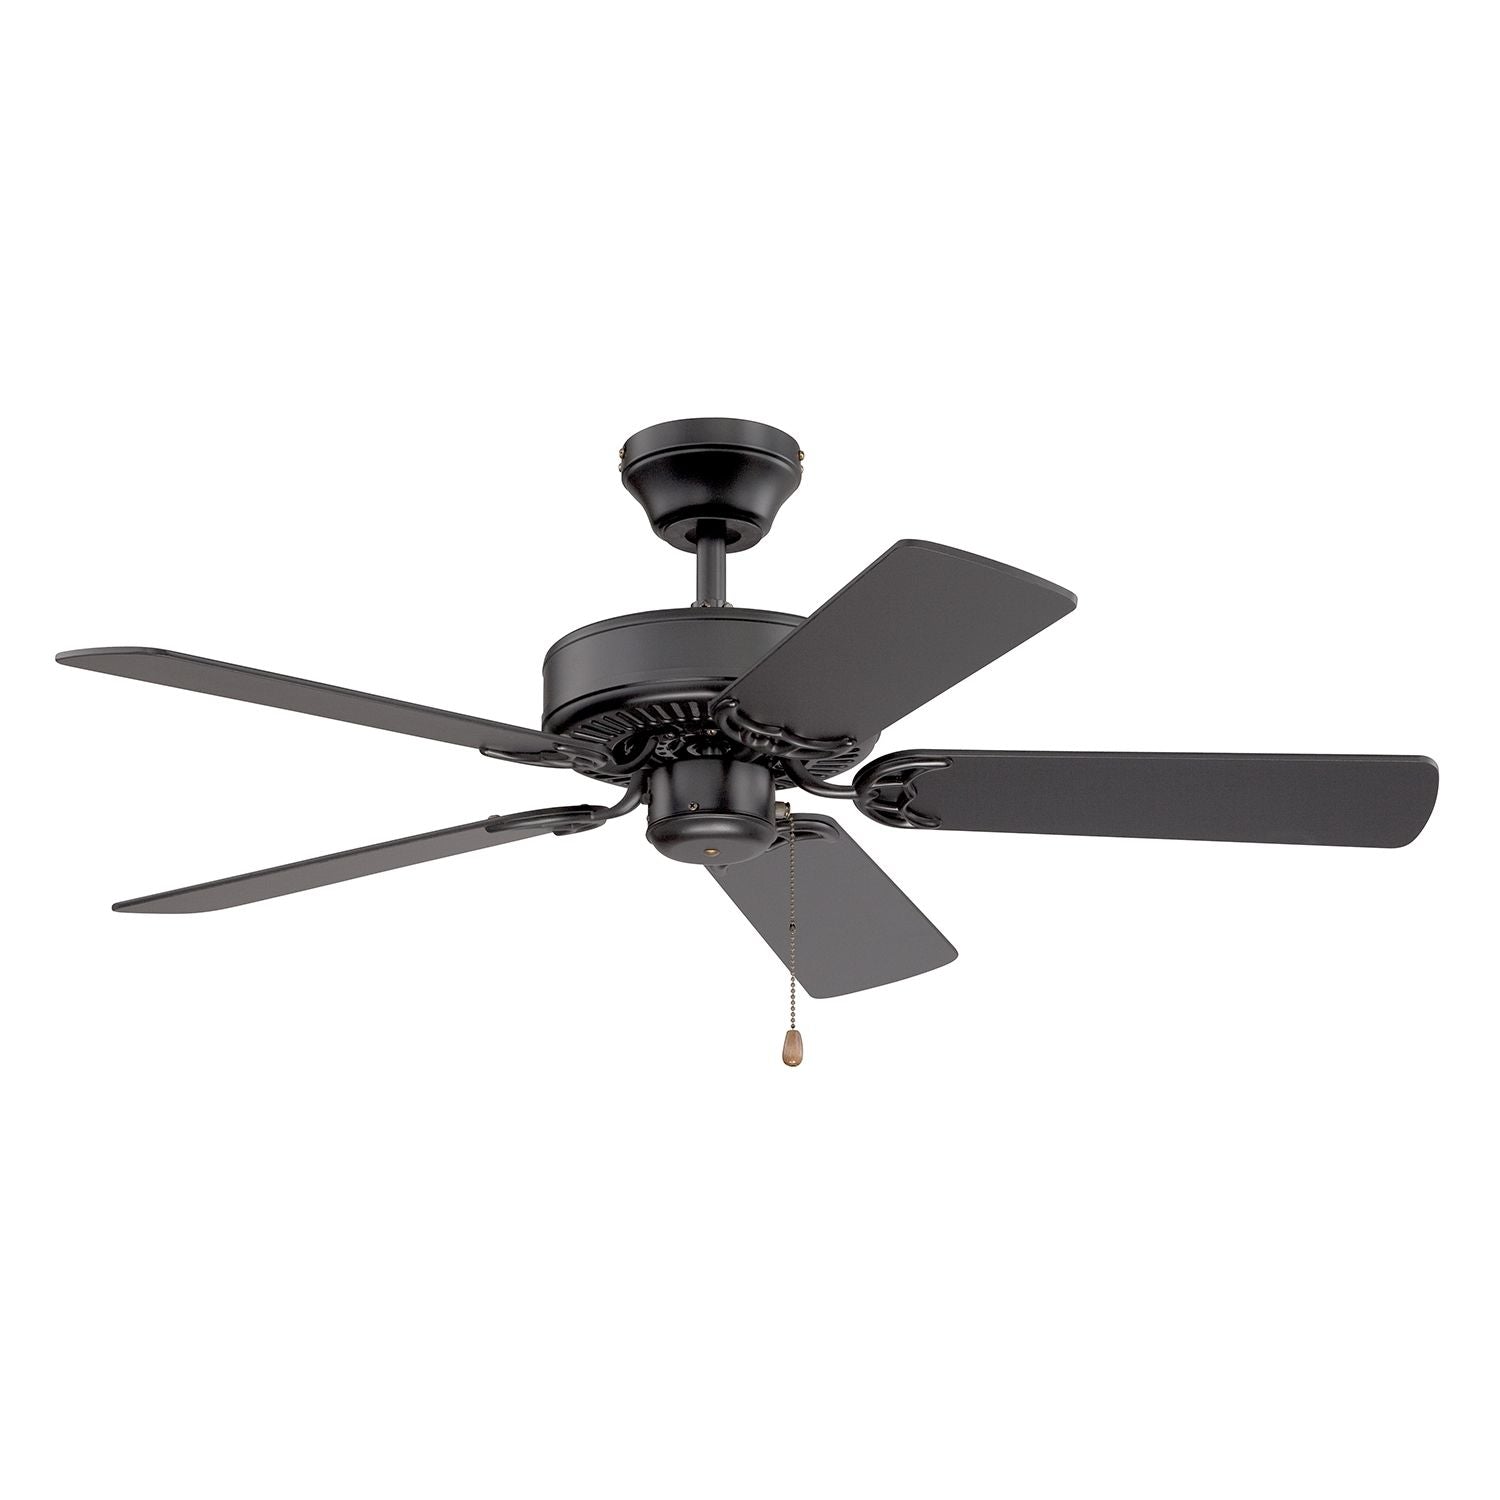 Builder'S Choice Ceiling Fan Black with Black blades